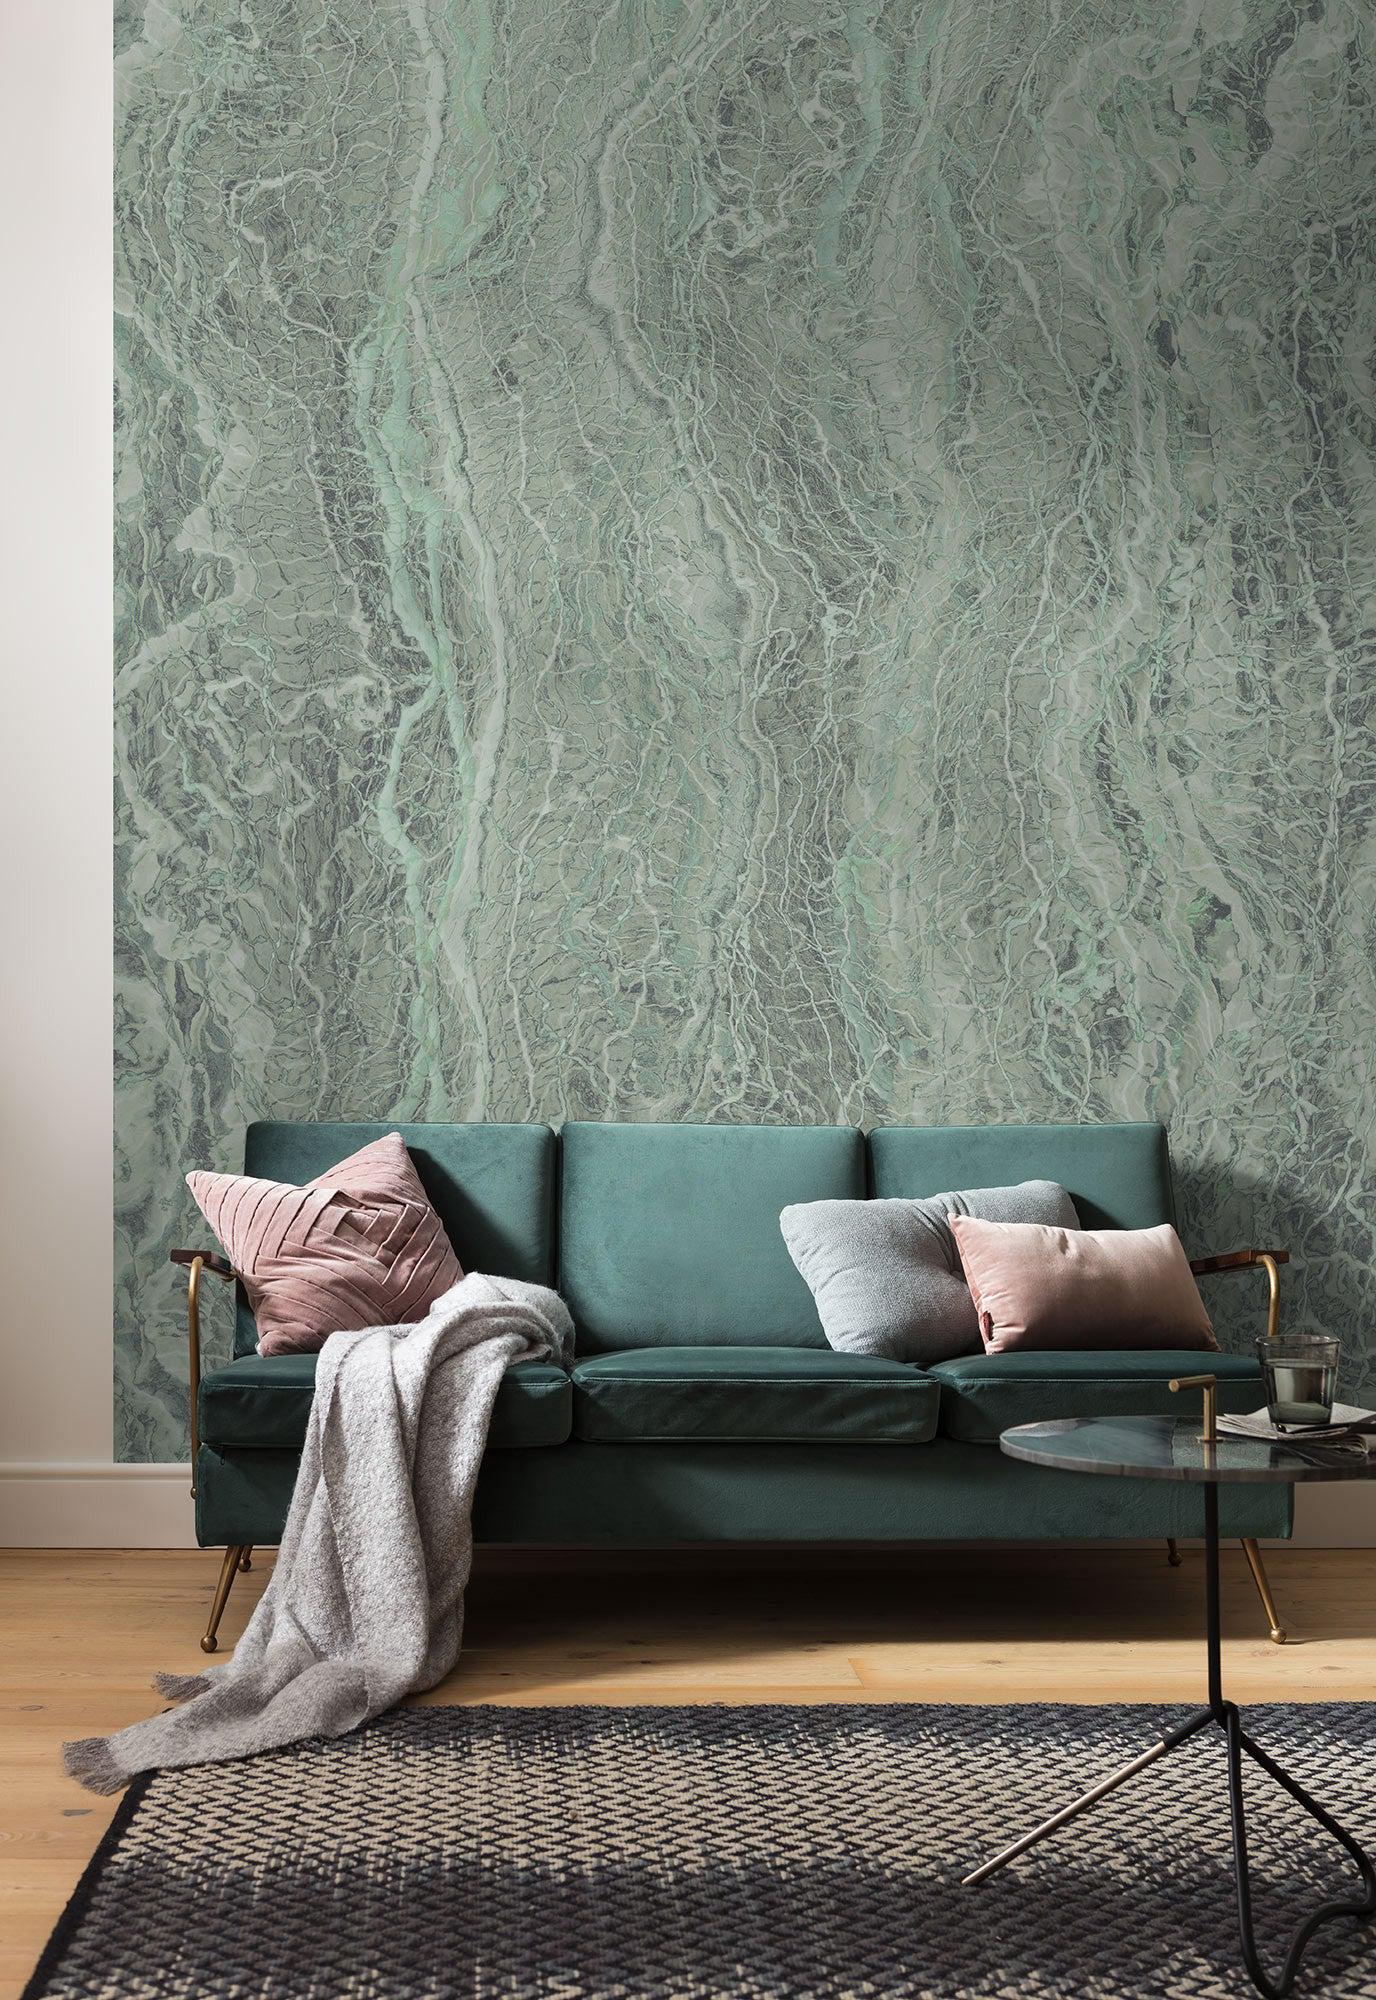 Neo Mint Marble Mural Wallpaper-Wall Decor-ART WALLPAPER, ECO MURALS, MURALS, MURALS / WALLPAPERS, NON-WOVEN WALLPAPER, STONE WALLPAPERS-Forest Homes-Nature inspired decor-Nature decor